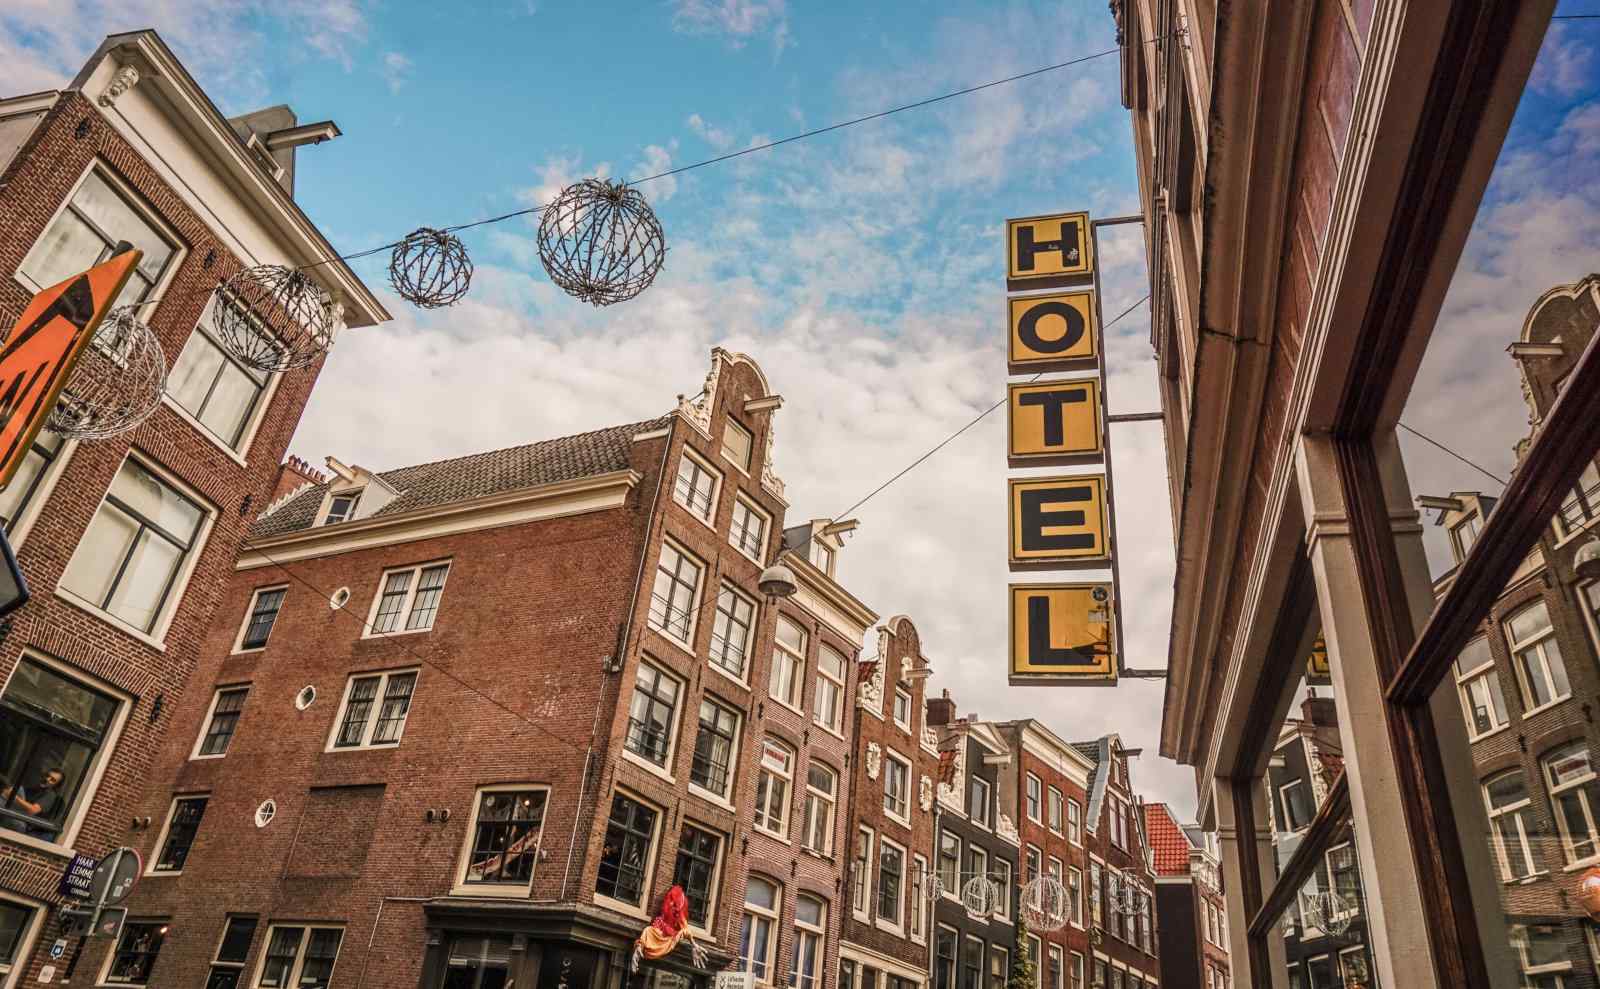 The Coolest Places to Stay in Amsterdam – A Guide to Amsterdam’s Neighbourhoods and Accommodation